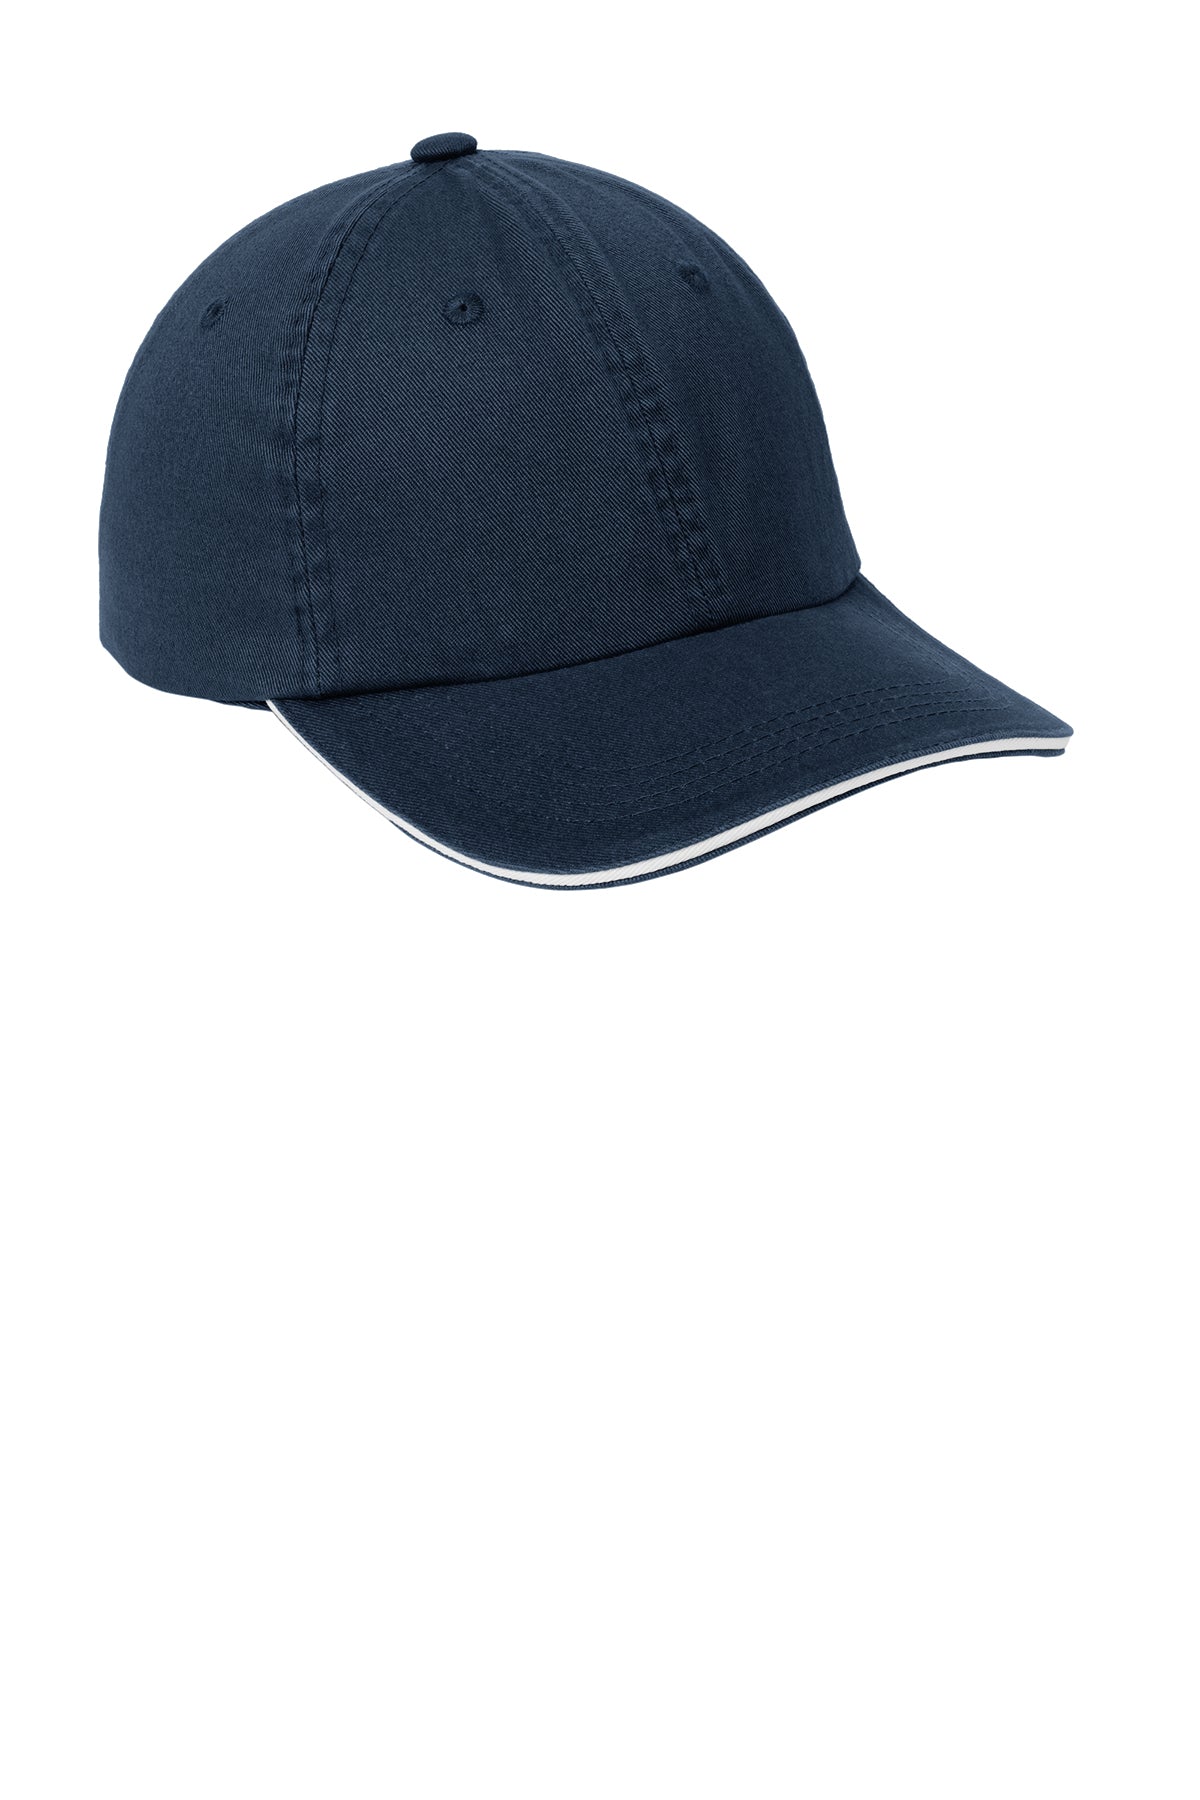 Port Authority Sandwich Bill Custom Caps with Striped Closure, Classic Navy/ White